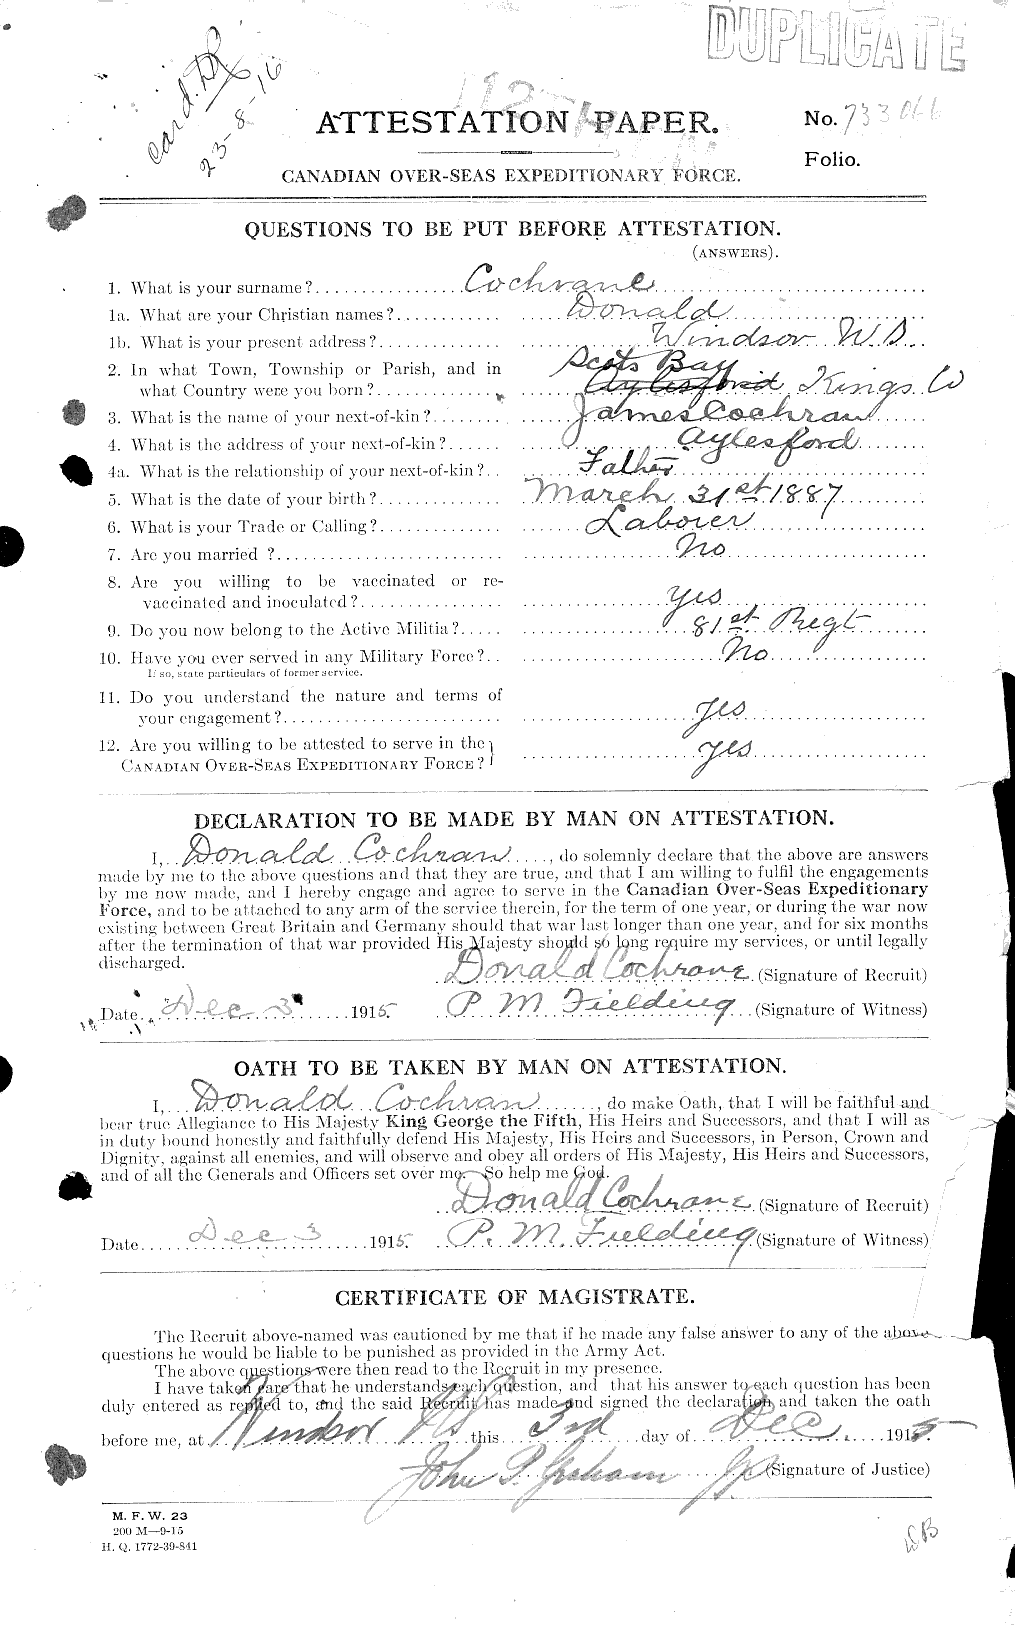 Personnel Records of the First World War - CEF 025857a